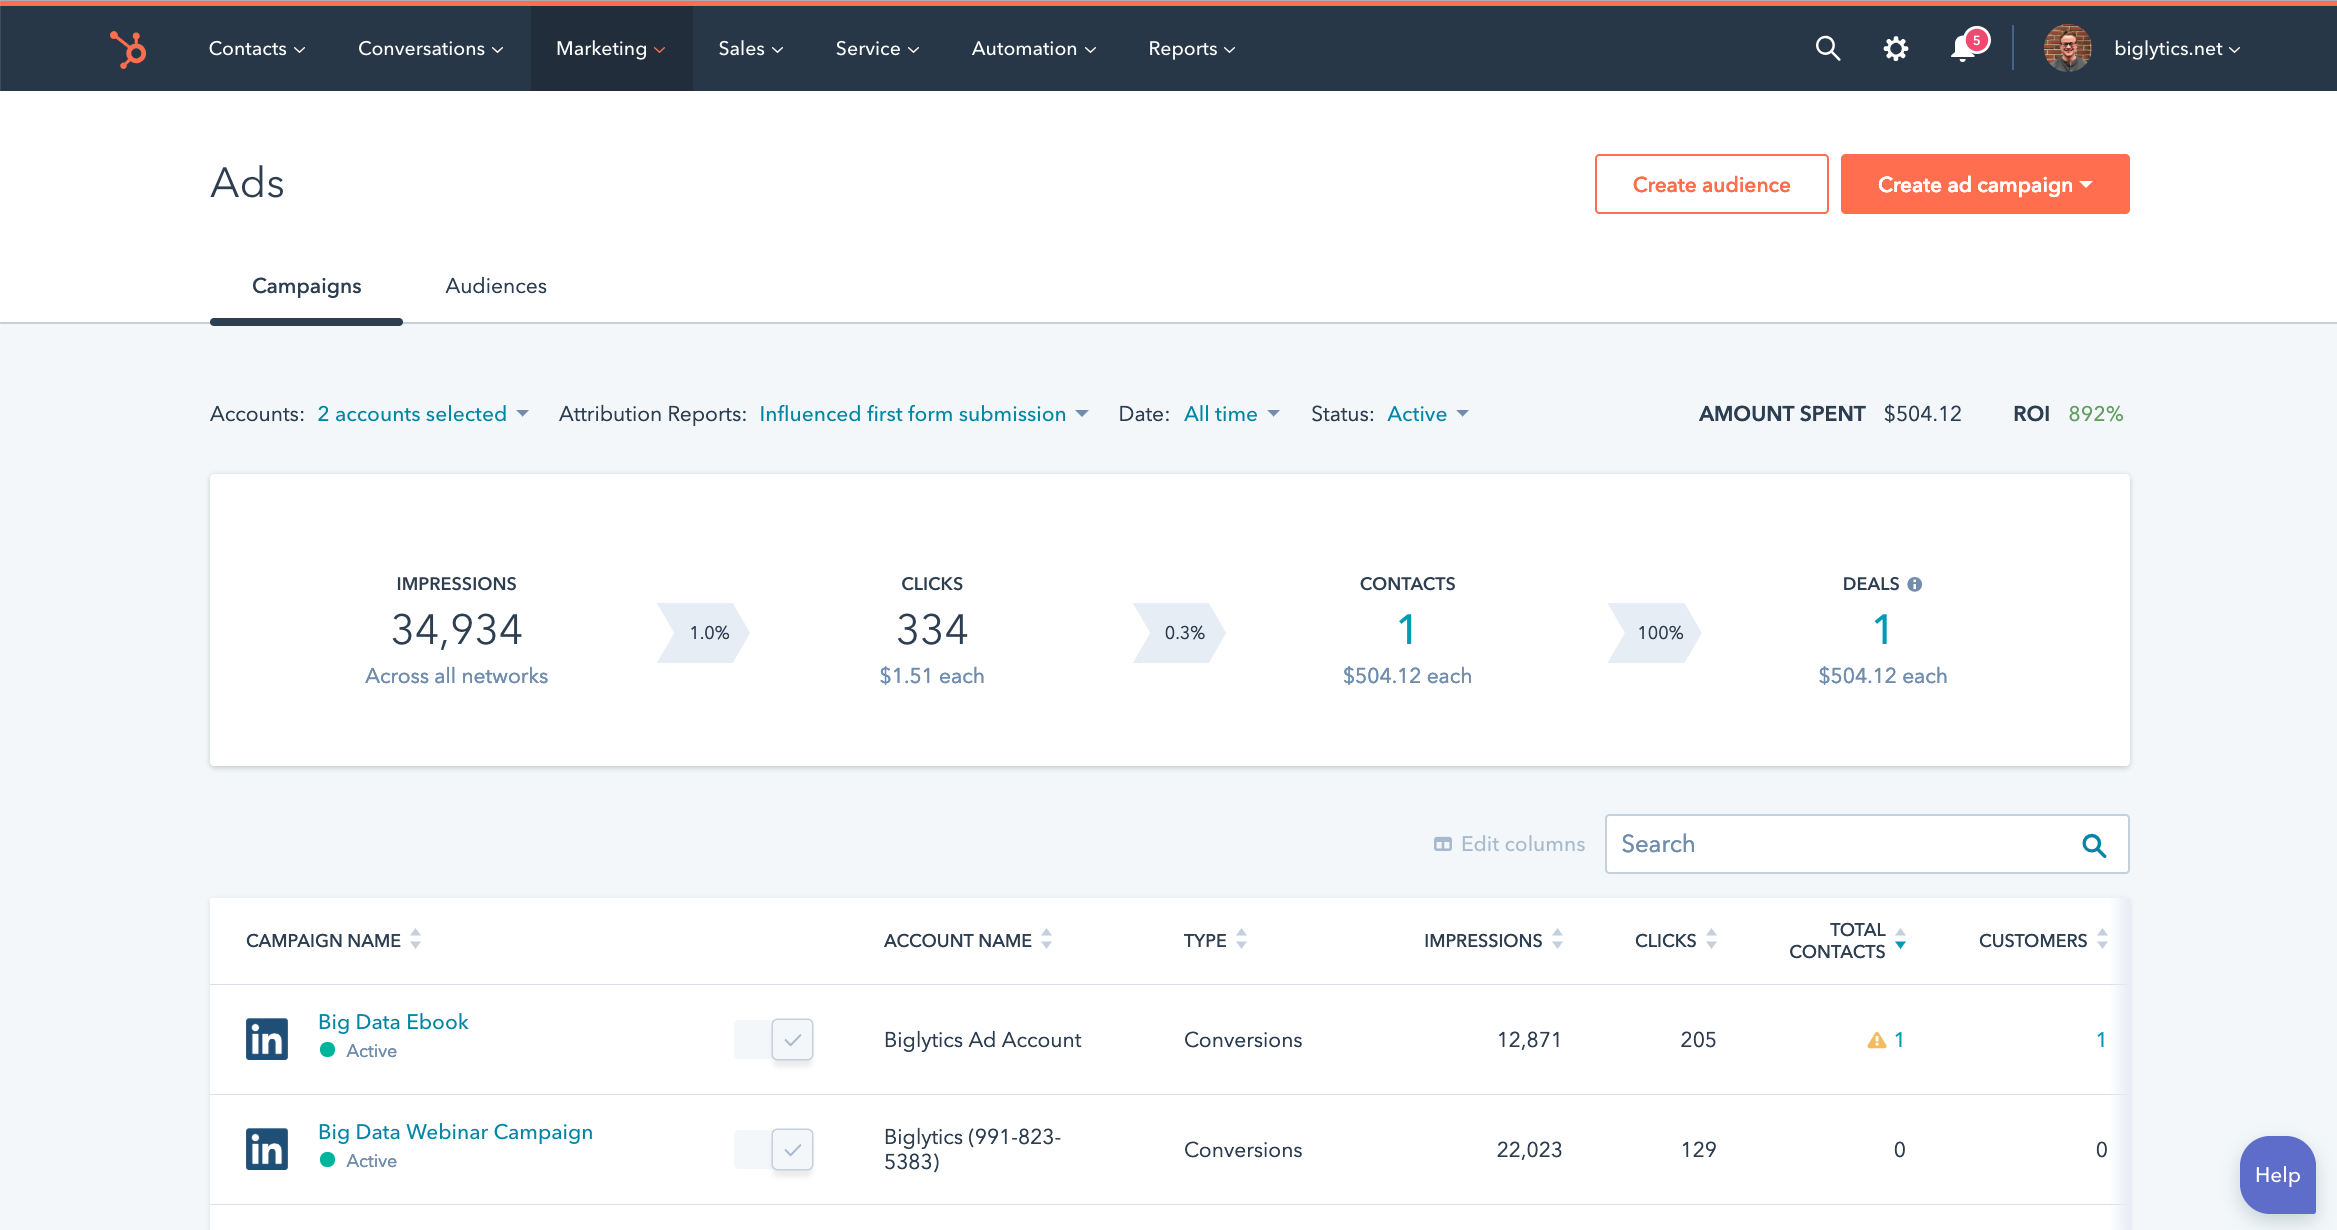 HubSpot Integrates LinkedIn Ads into Professional and Enterprise Tiers of Marketing Hub